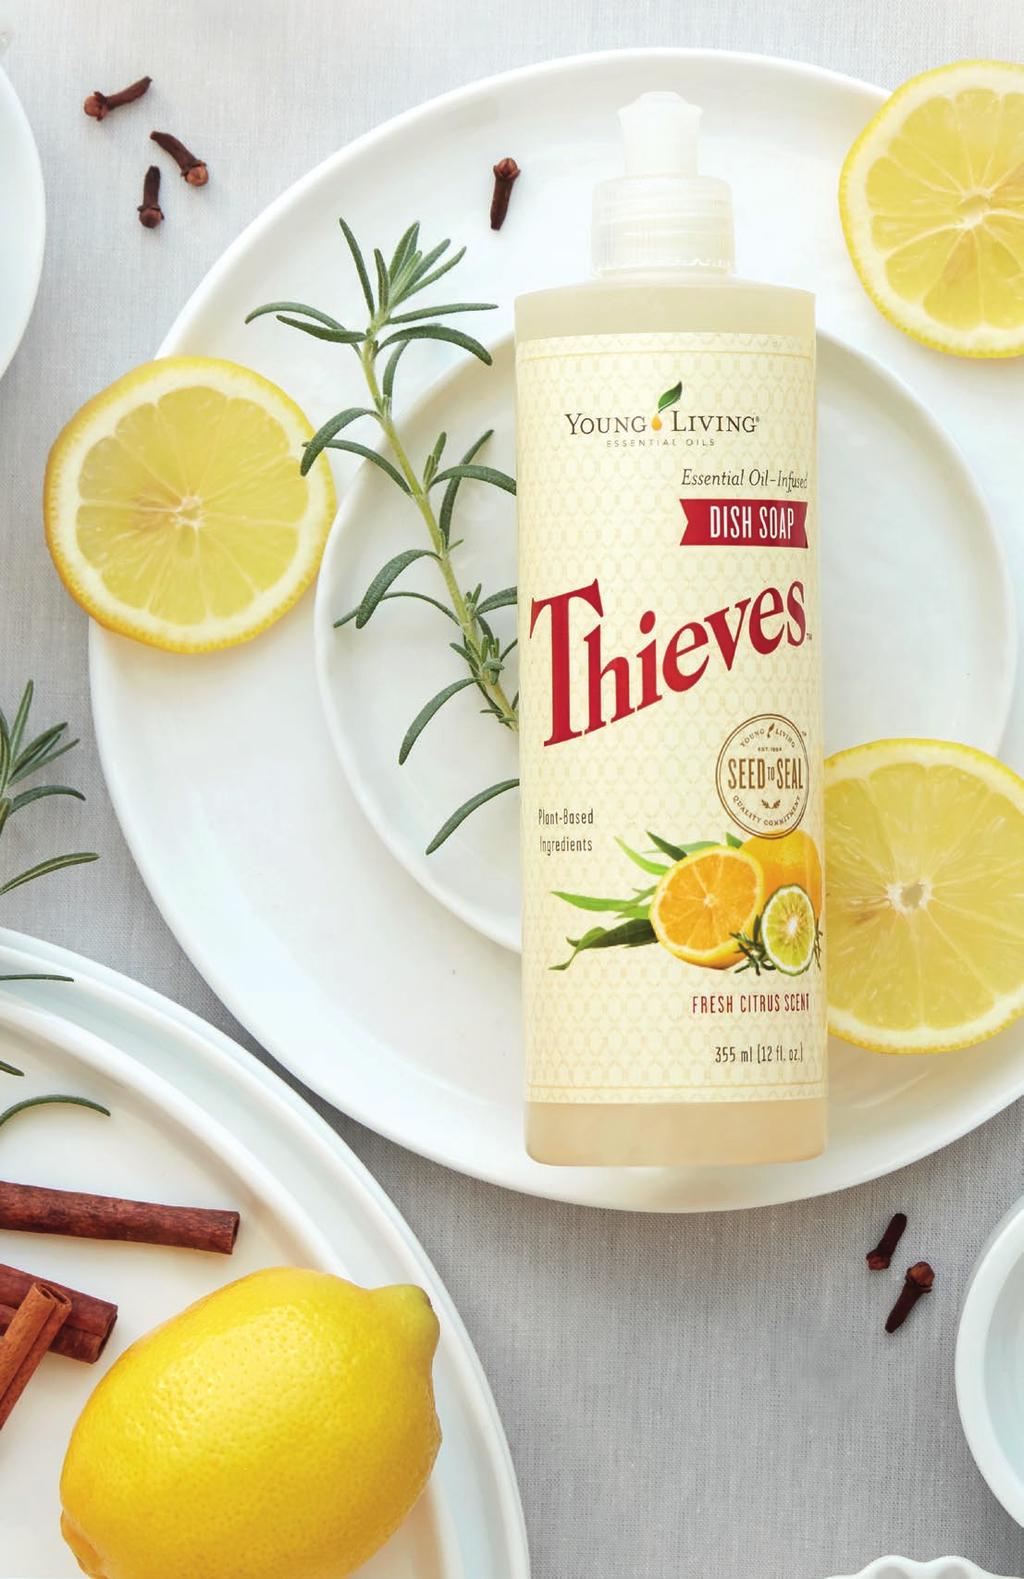 Learn more about Thieves and other exclusive essential oils, blends and products at YoungLiving.com.